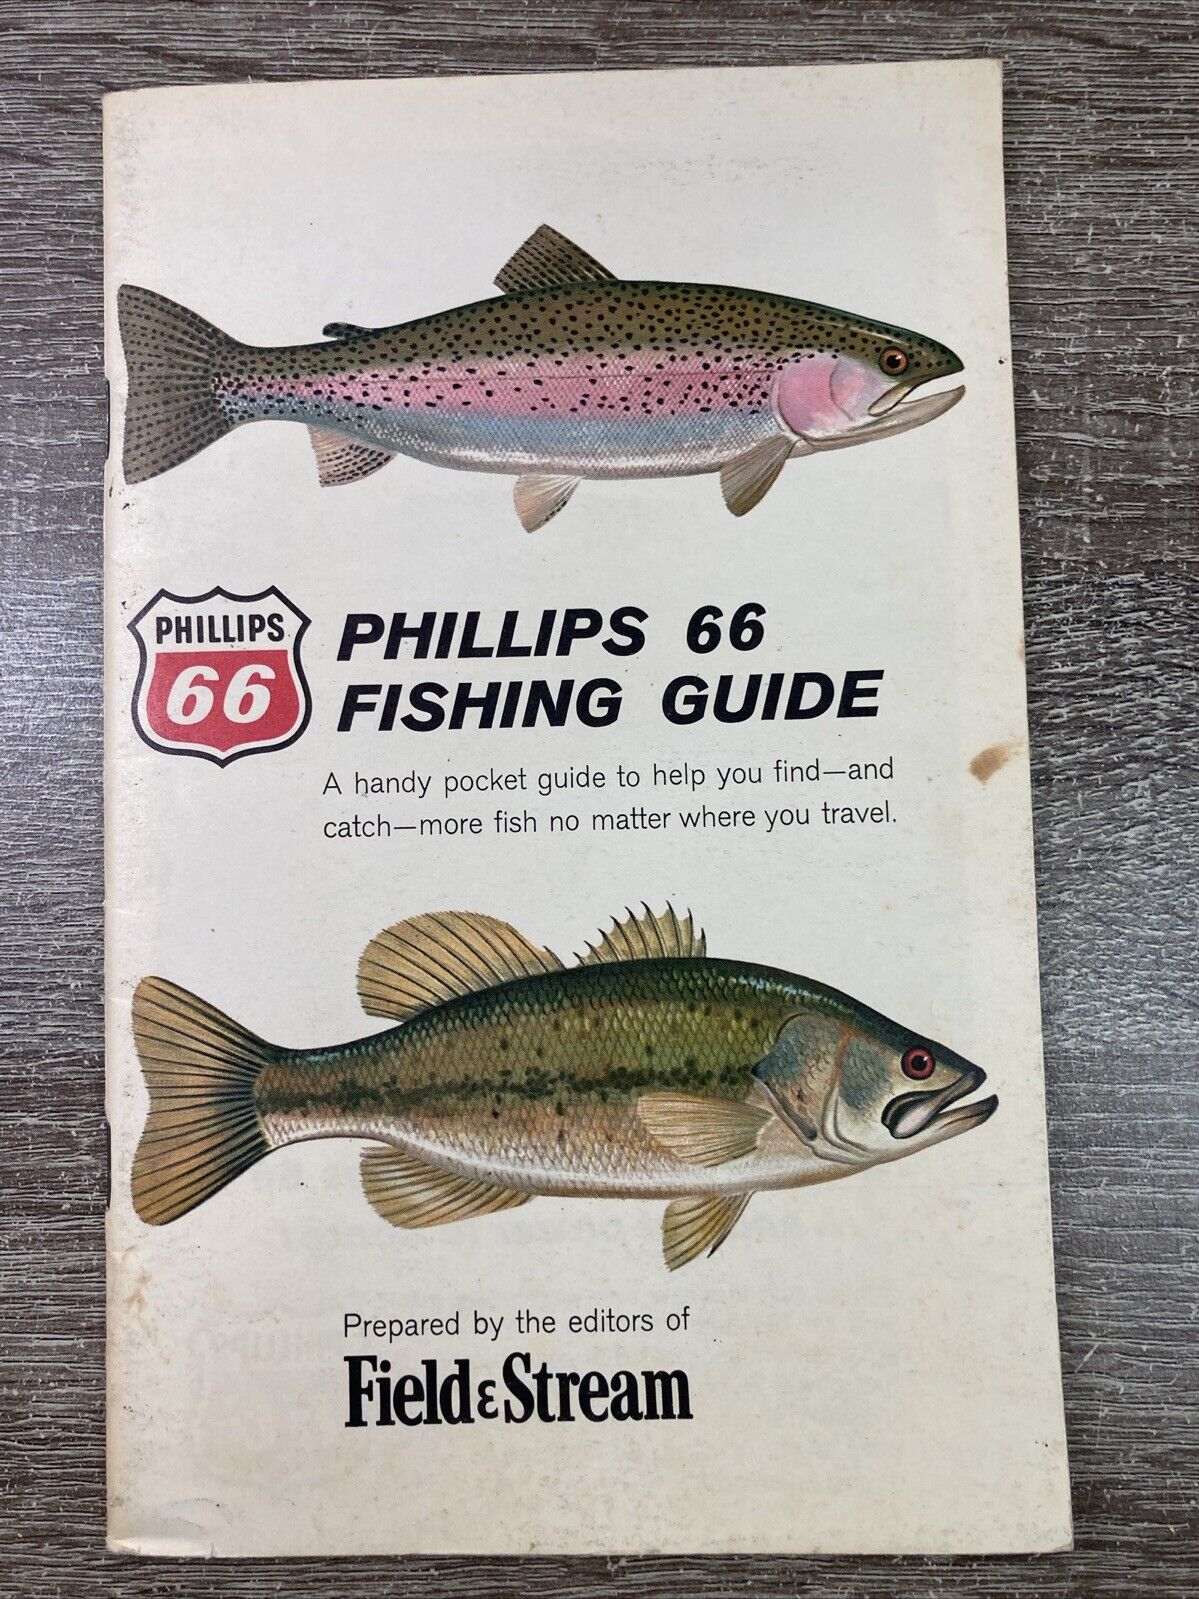 Vintage 1963 Phillips 66 Pocket Fishing Guide Booklet by Field & Stream